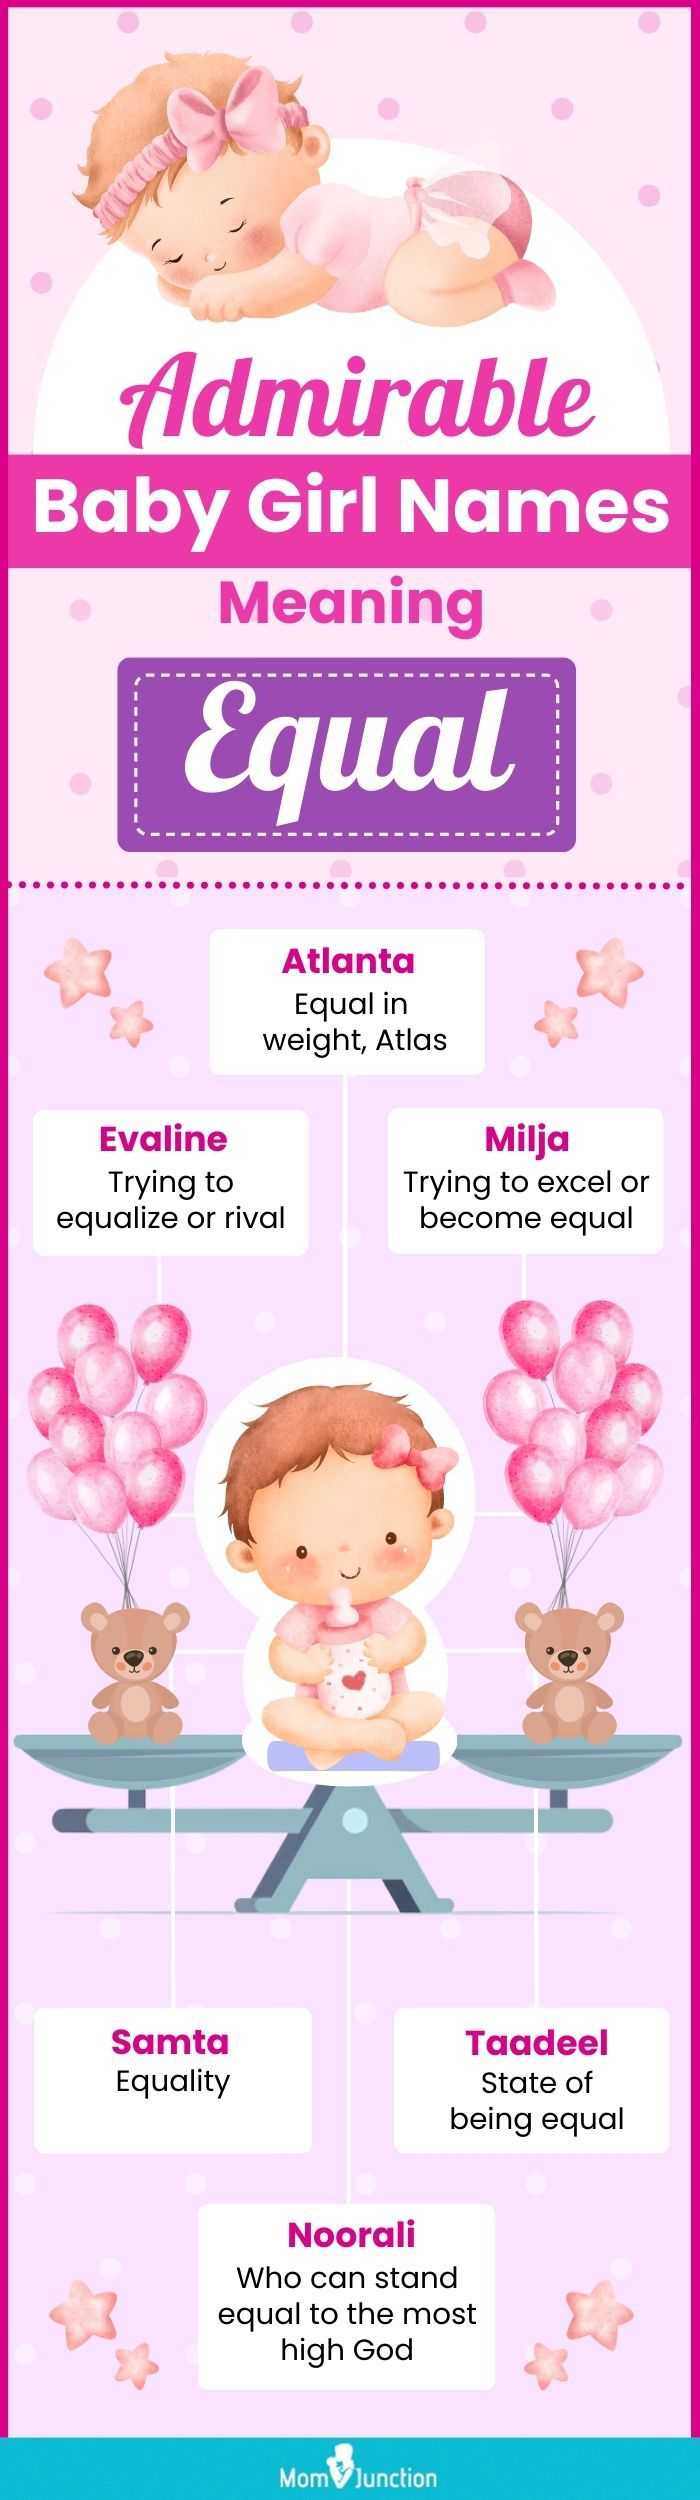 admirable baby girl names meaning equal (infographic)